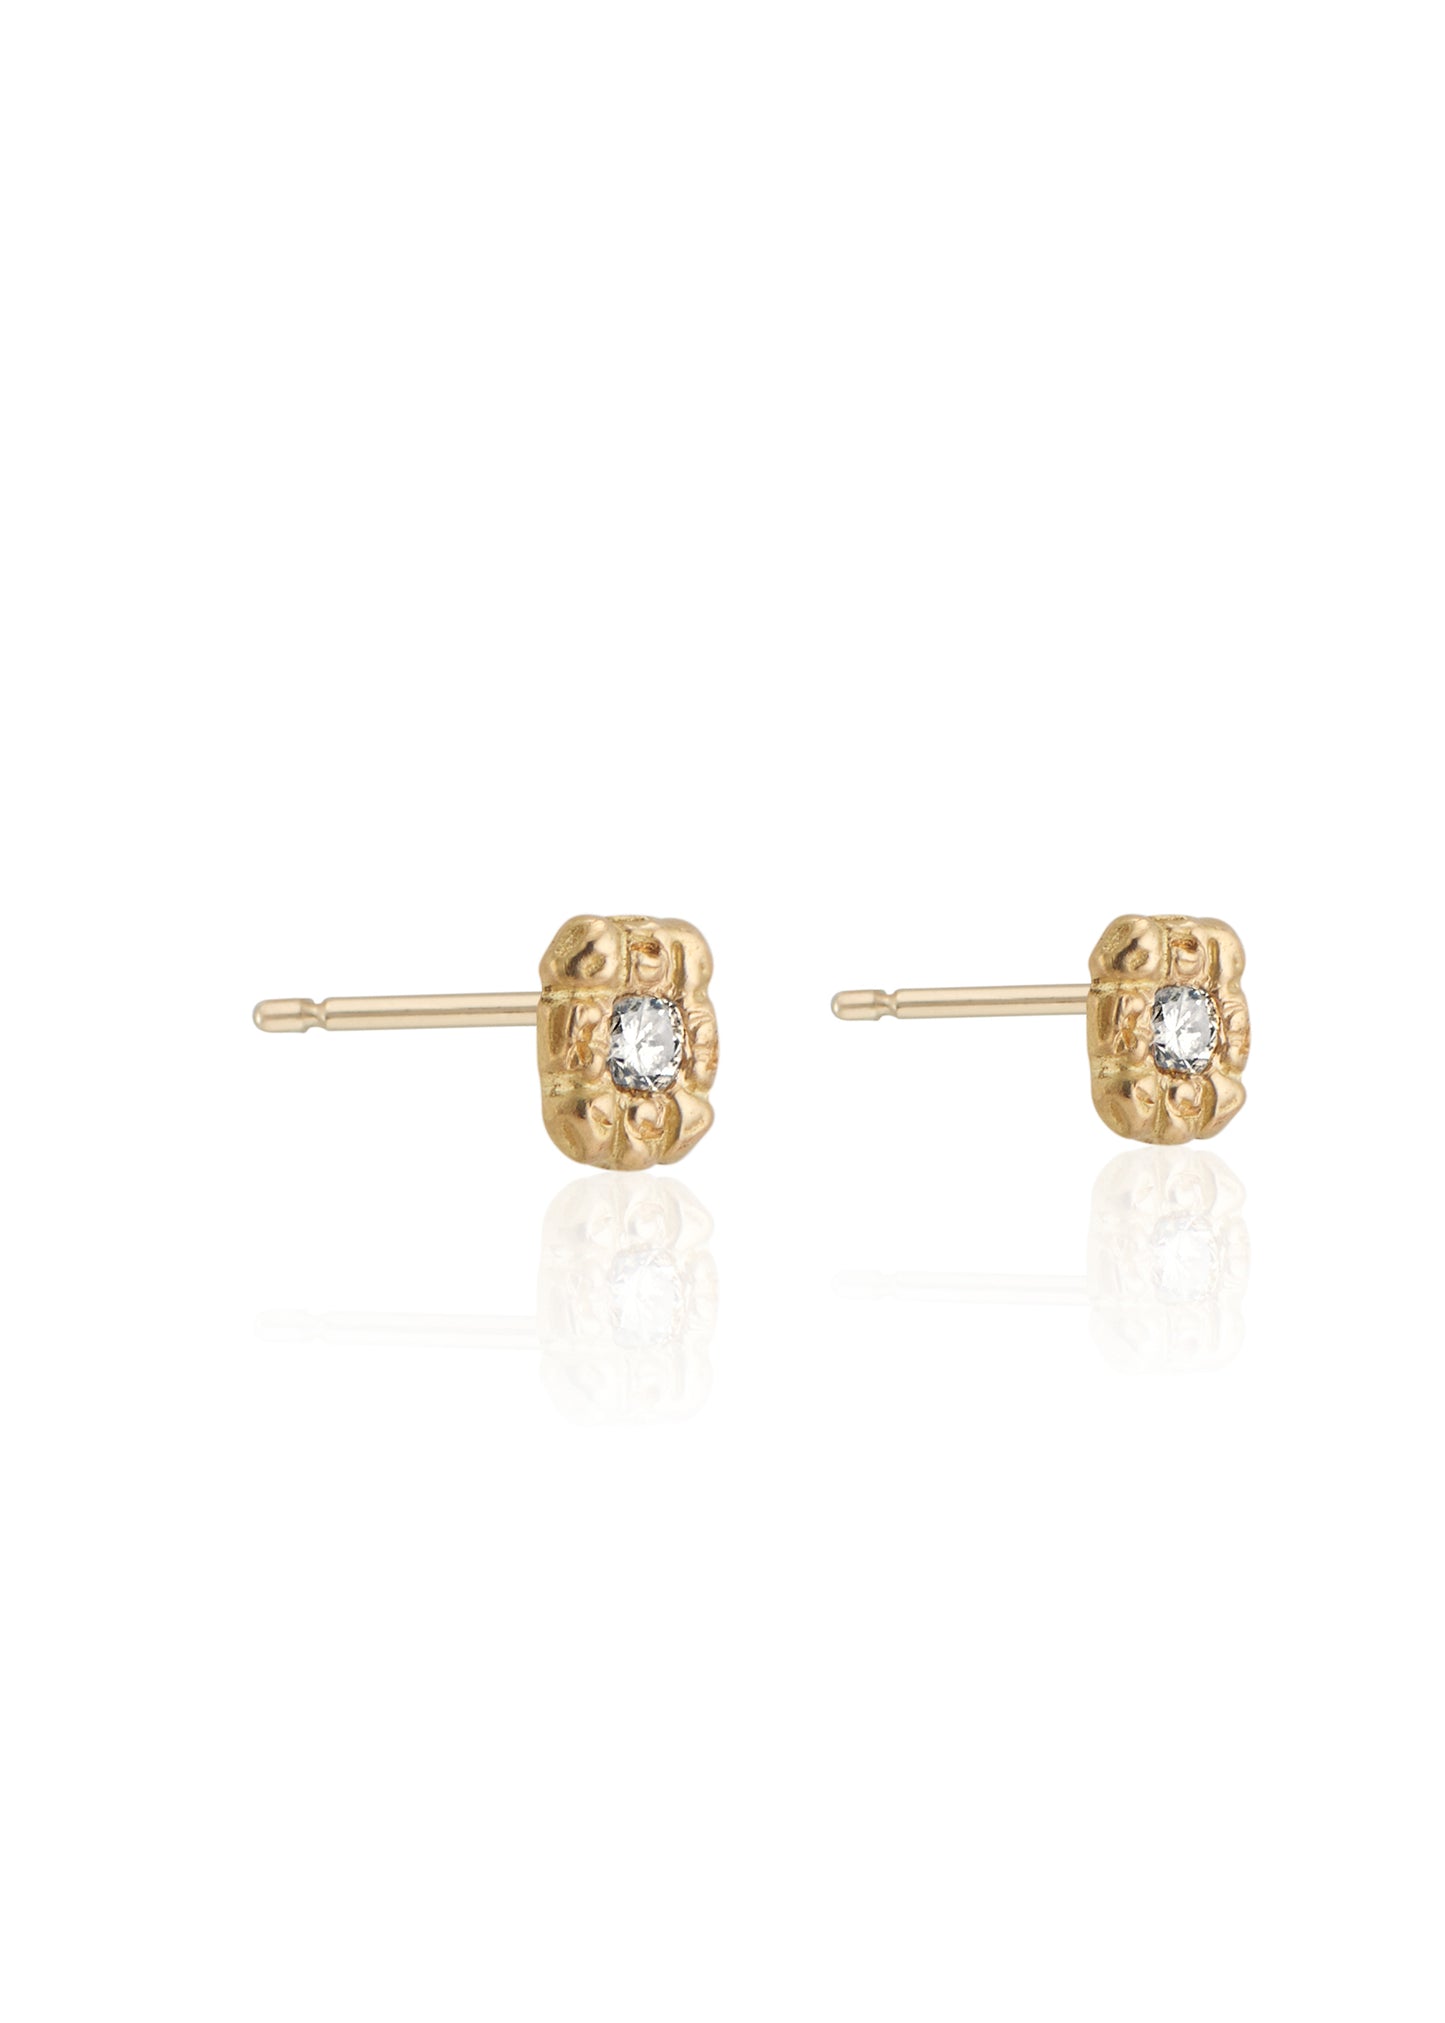 Textured gold, hand-carved to reveal its lustre, surrounds gleaming diamonds to create the Barre earring—an essential and elegant design that calls to mind the effortless grace of a ballerina at the barre. 